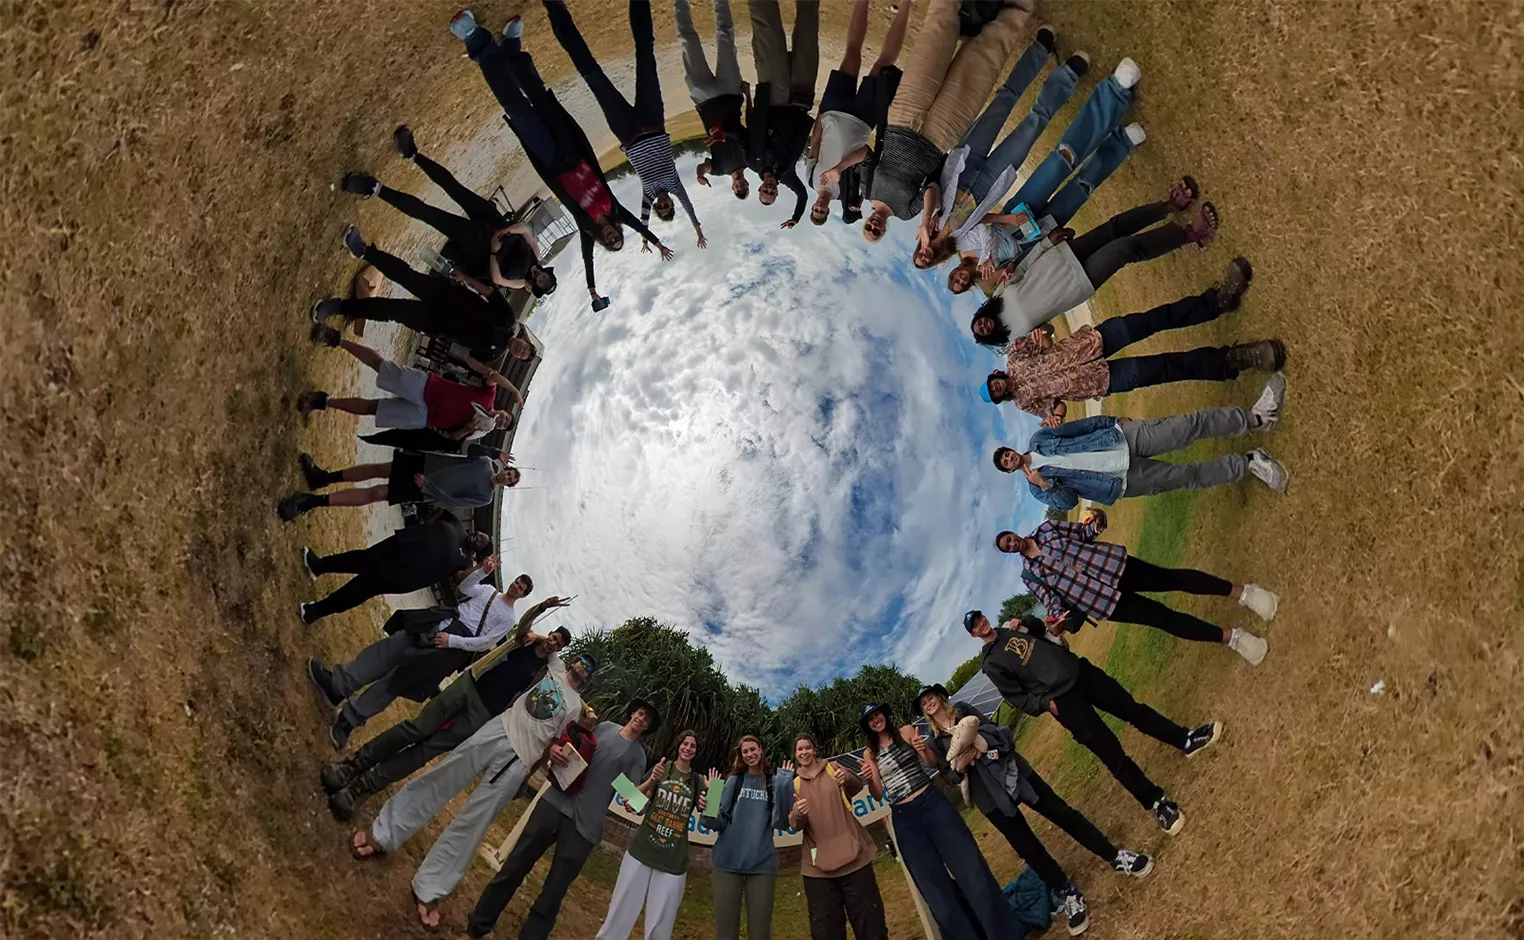 Group standing in circle with sky at center